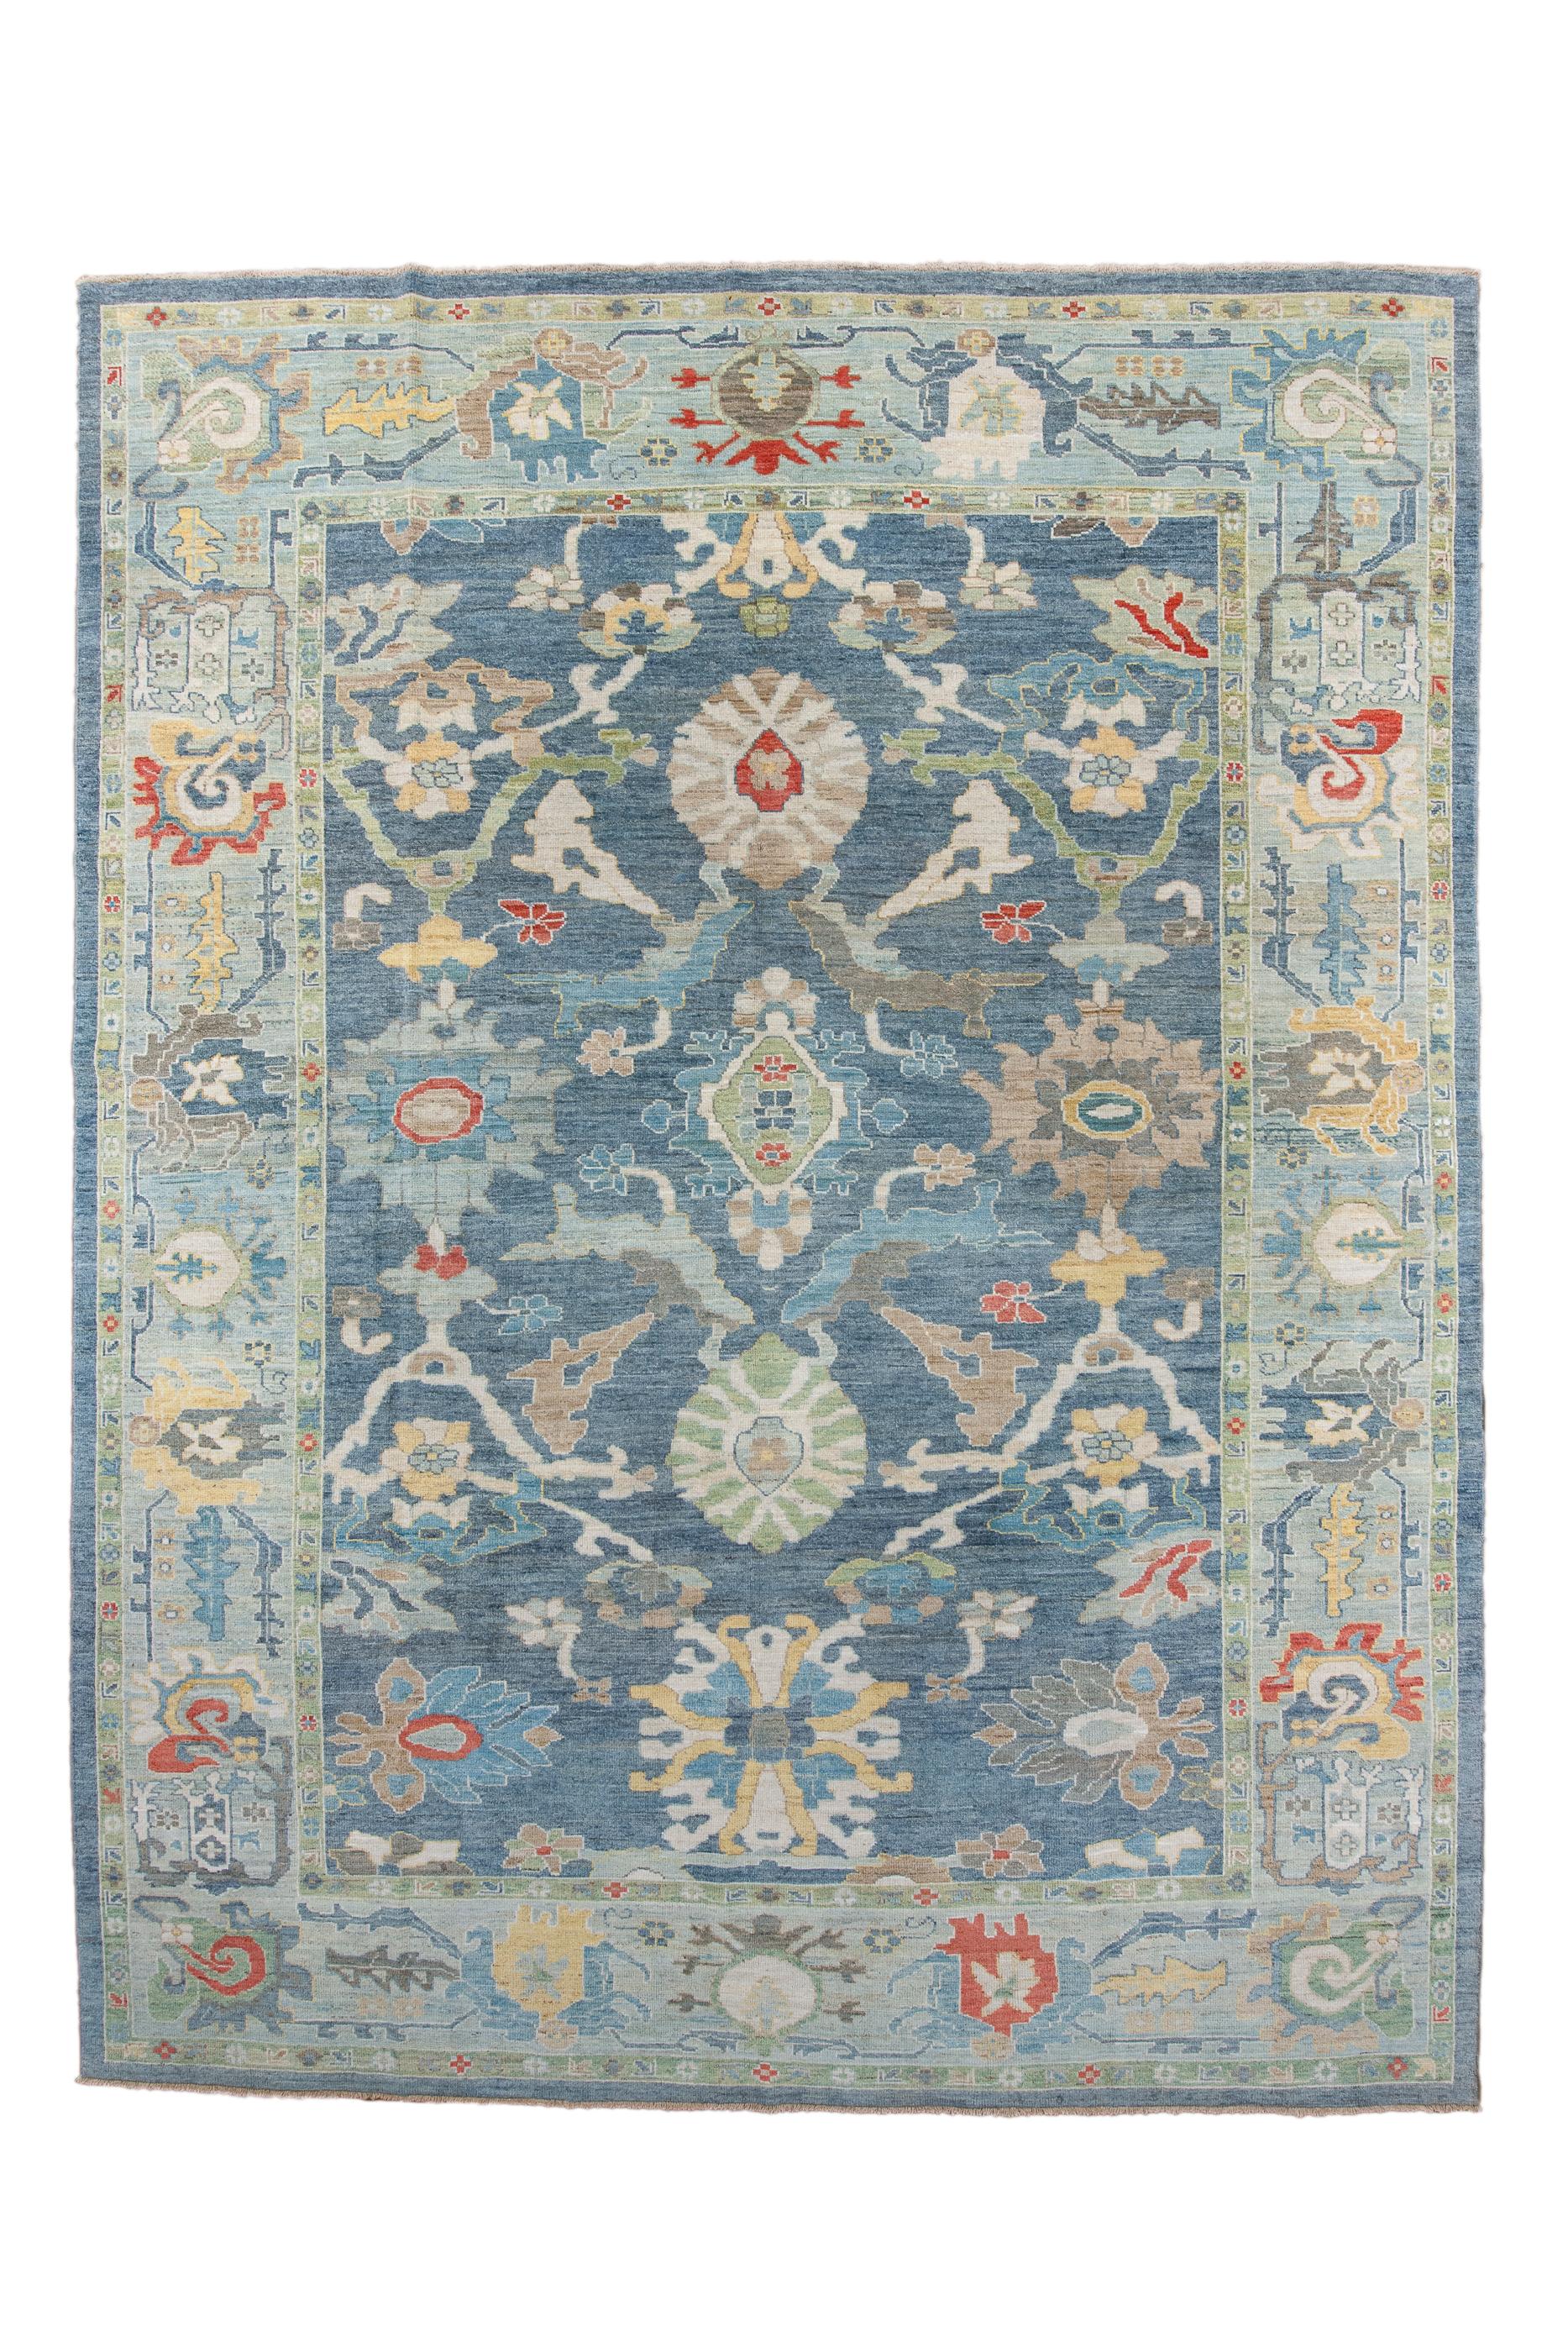 This very attractive village carpet shows a Ziegler-like large palmette pattern in ovals and various ragged palmettes, on an abrashed teal-blue ground, with light blue, straw, goldenrod and salmon secondary tones.  Abrashed powder border with large,